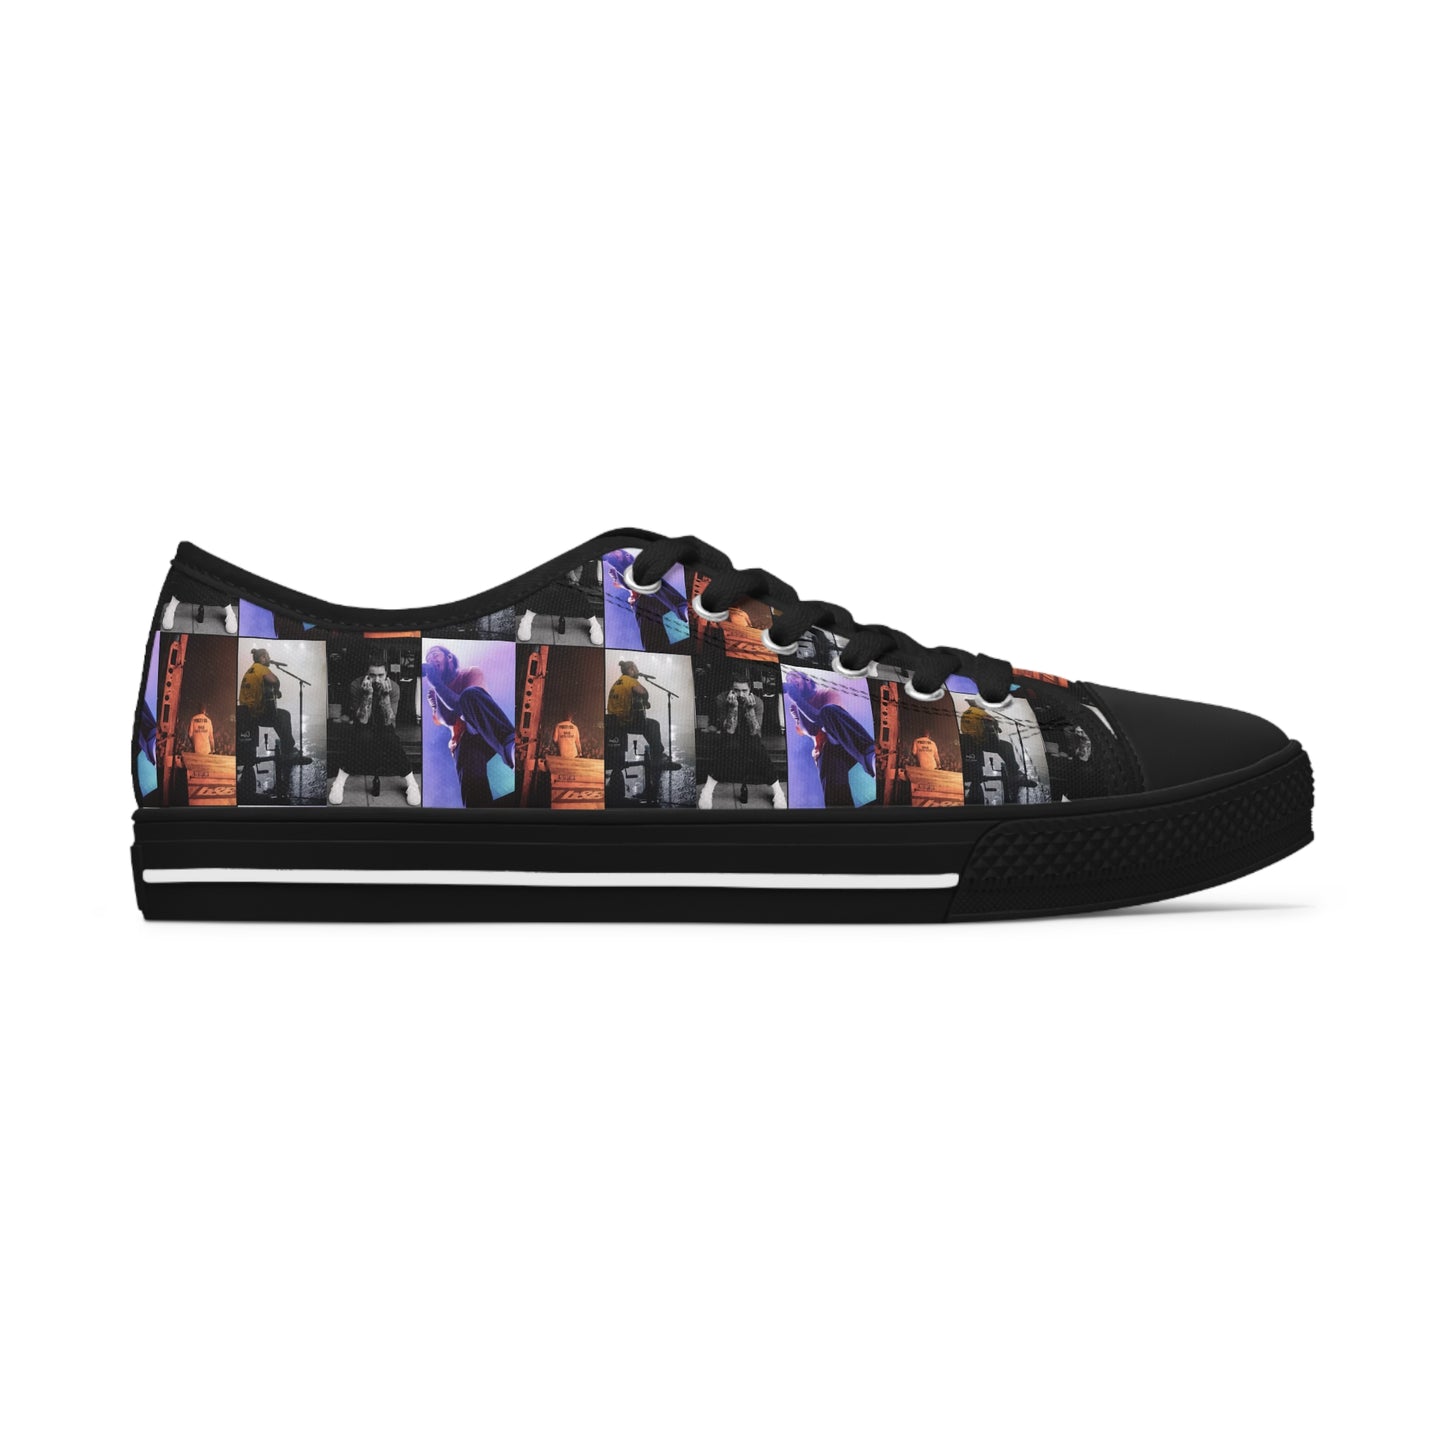 Post Malone On Tour Collage Women's Low Top Sneakers